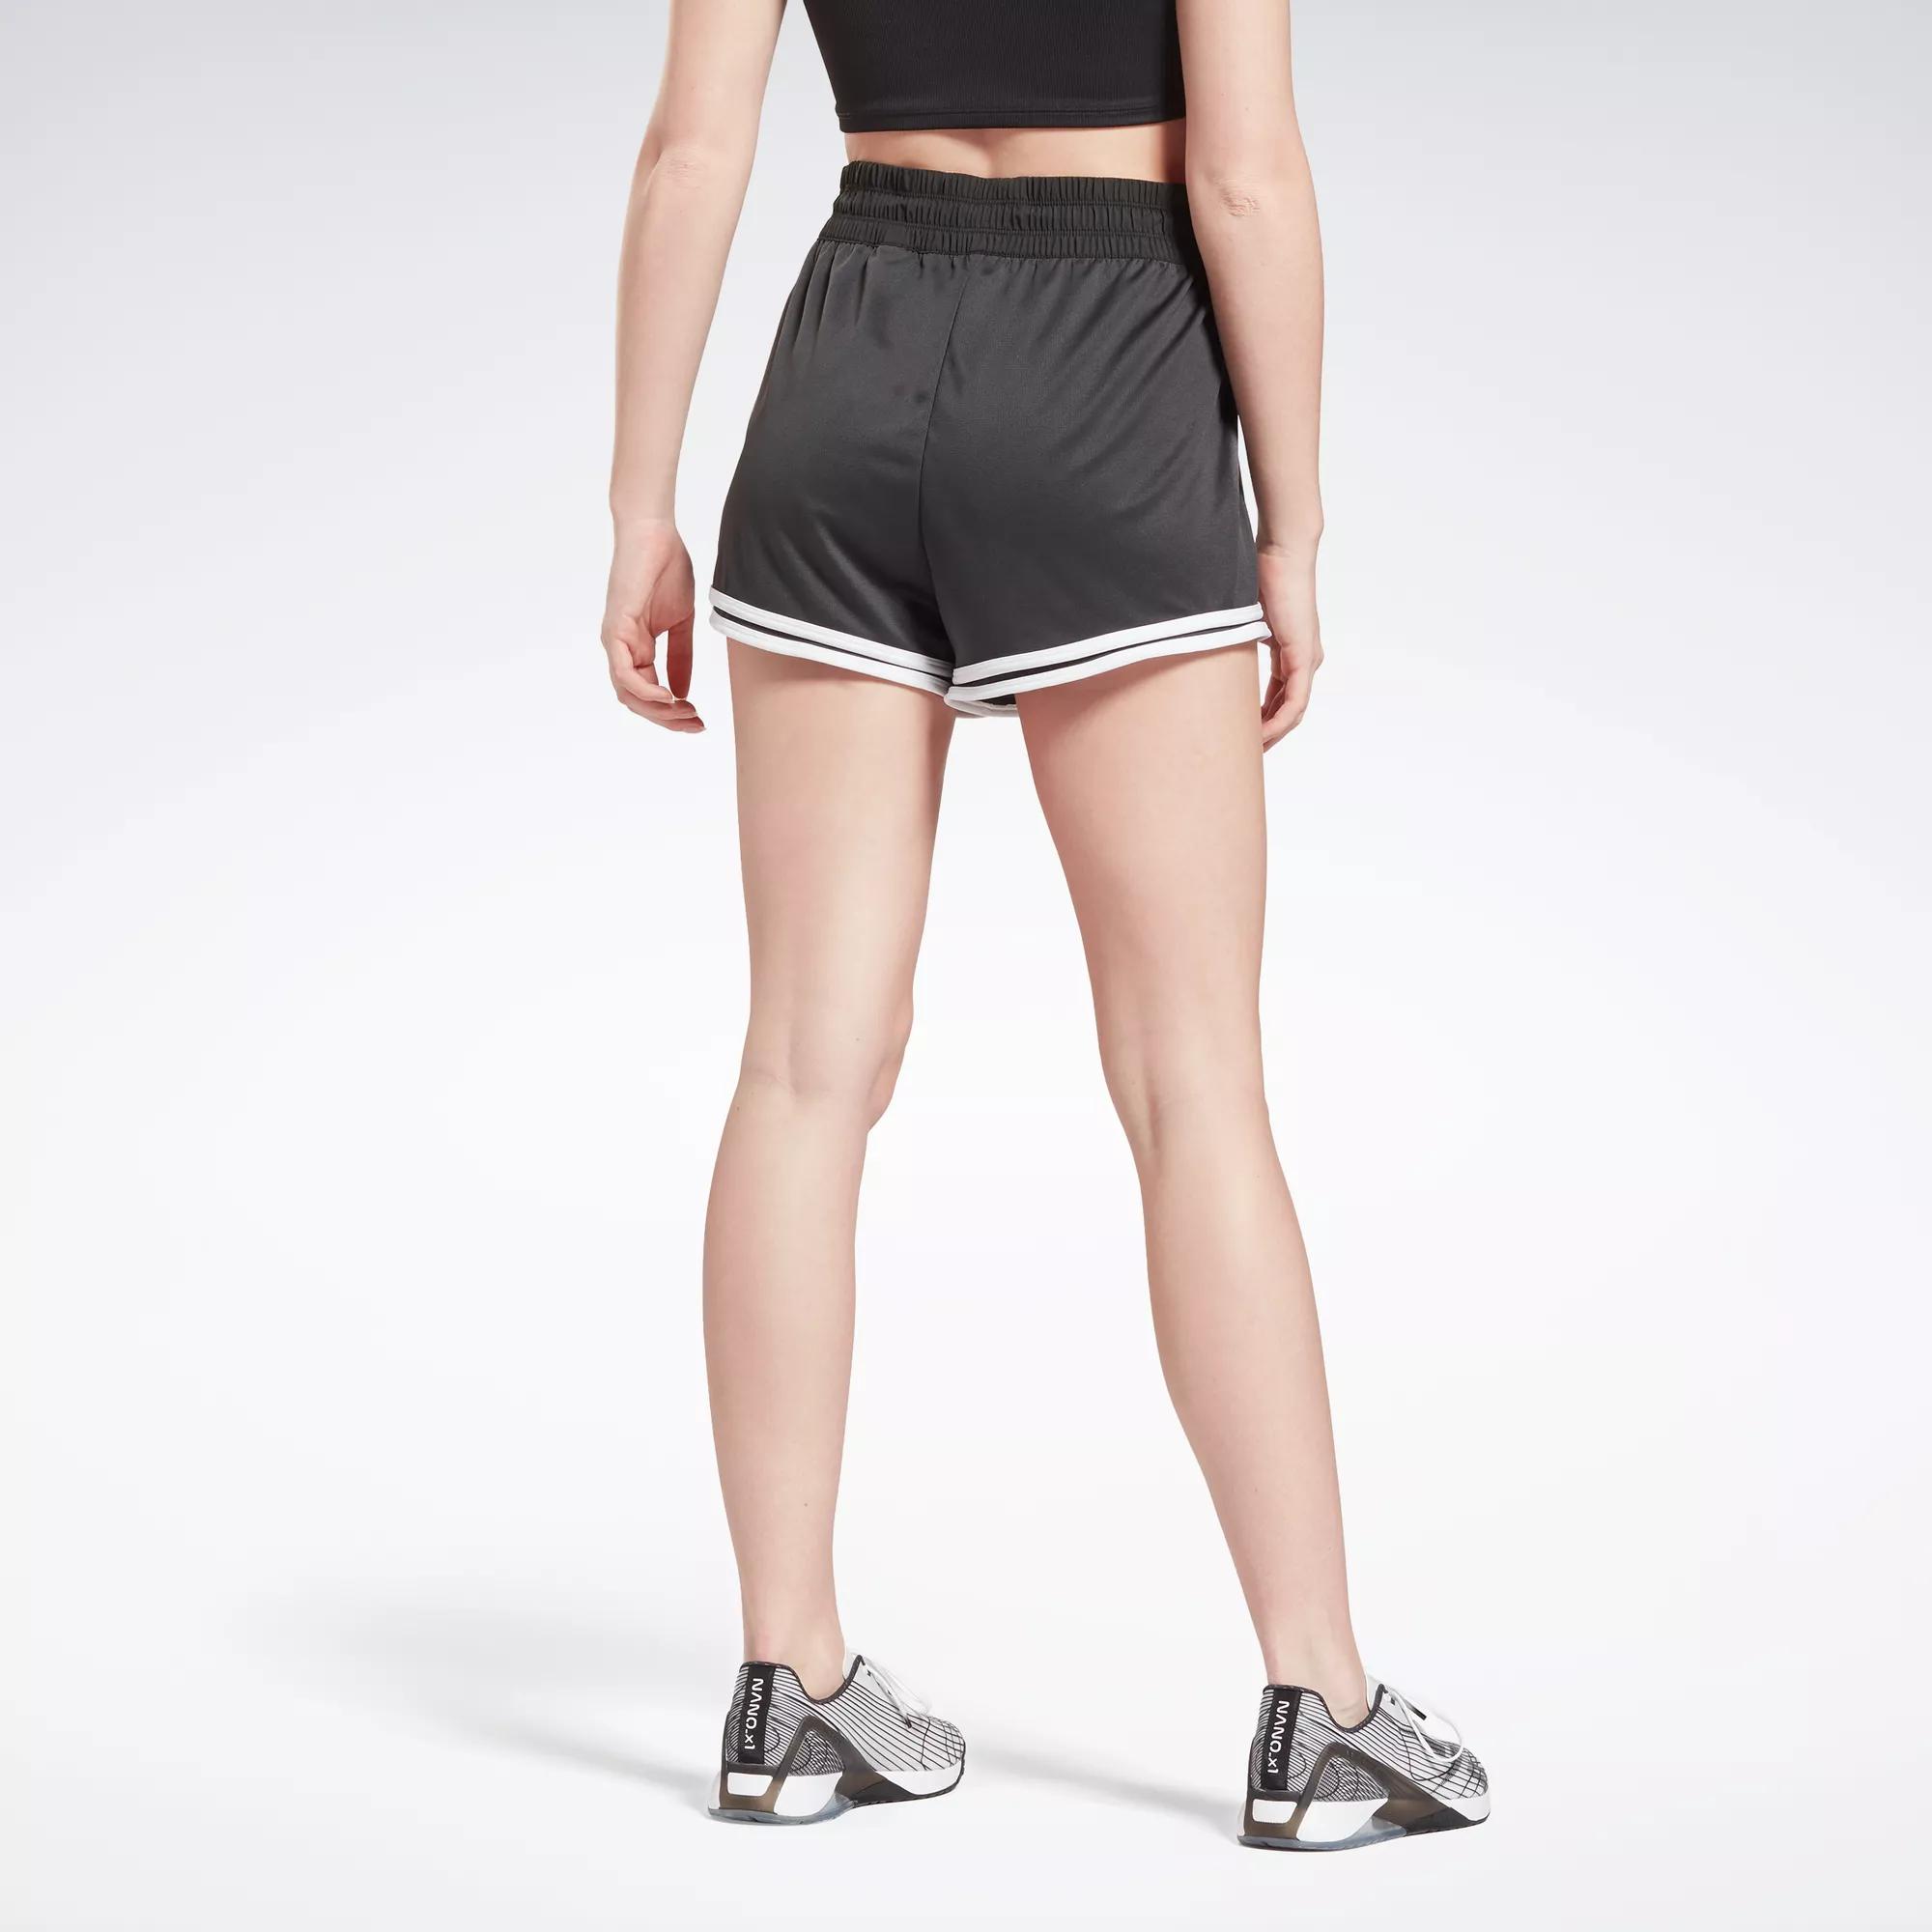 Validering Myre Forbedre Workout Ready High-Rise Shorts - Night Black | Reebok